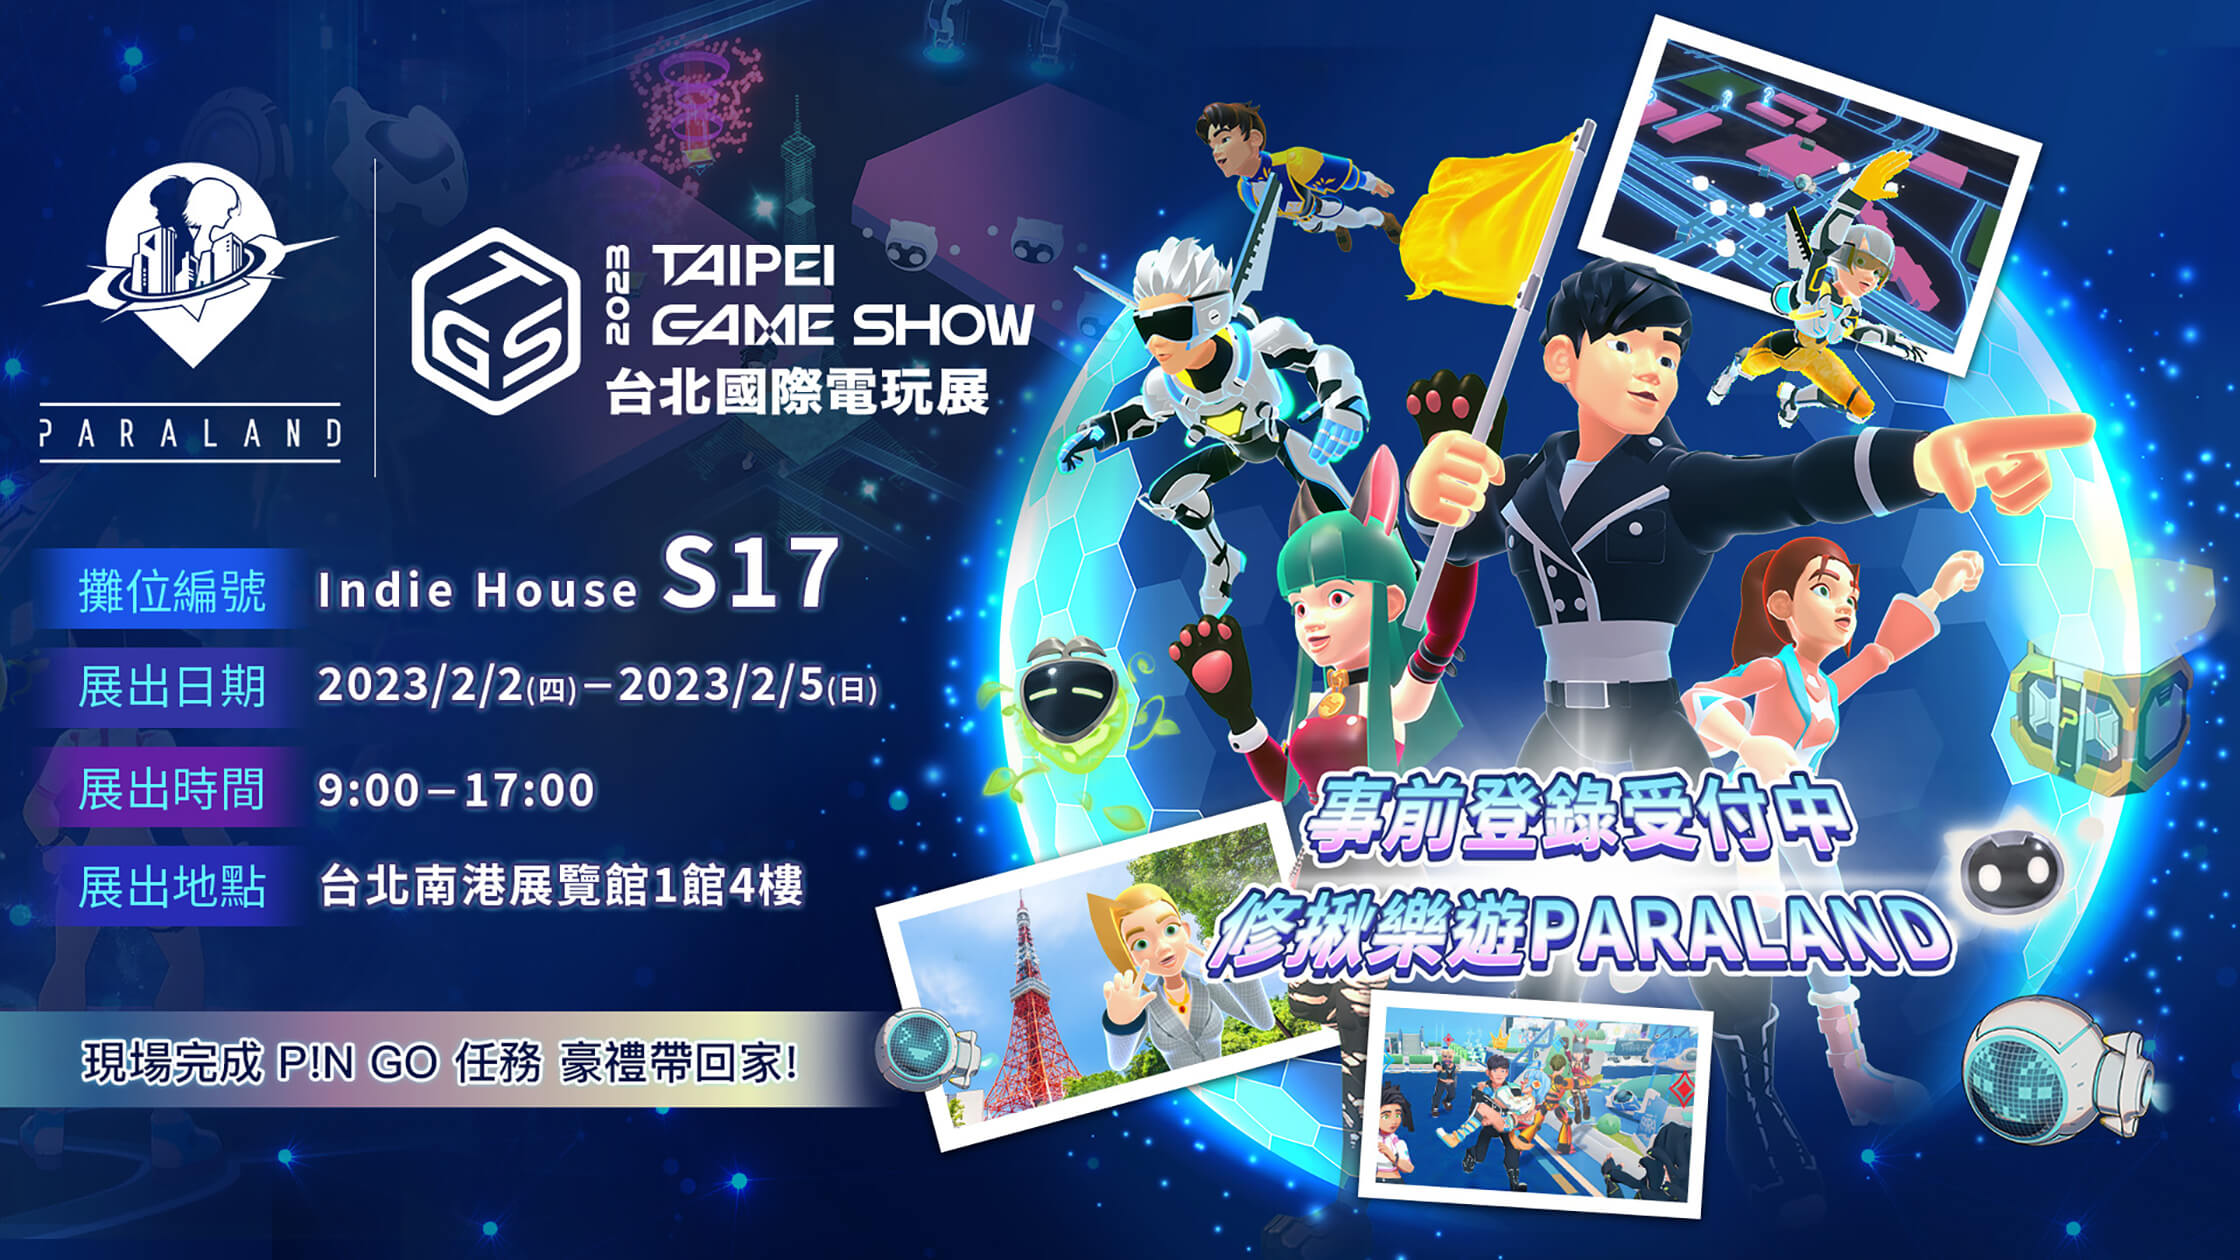 PARALAND AR Metaverse Mobile Game will be open for pre-registration at TGS!